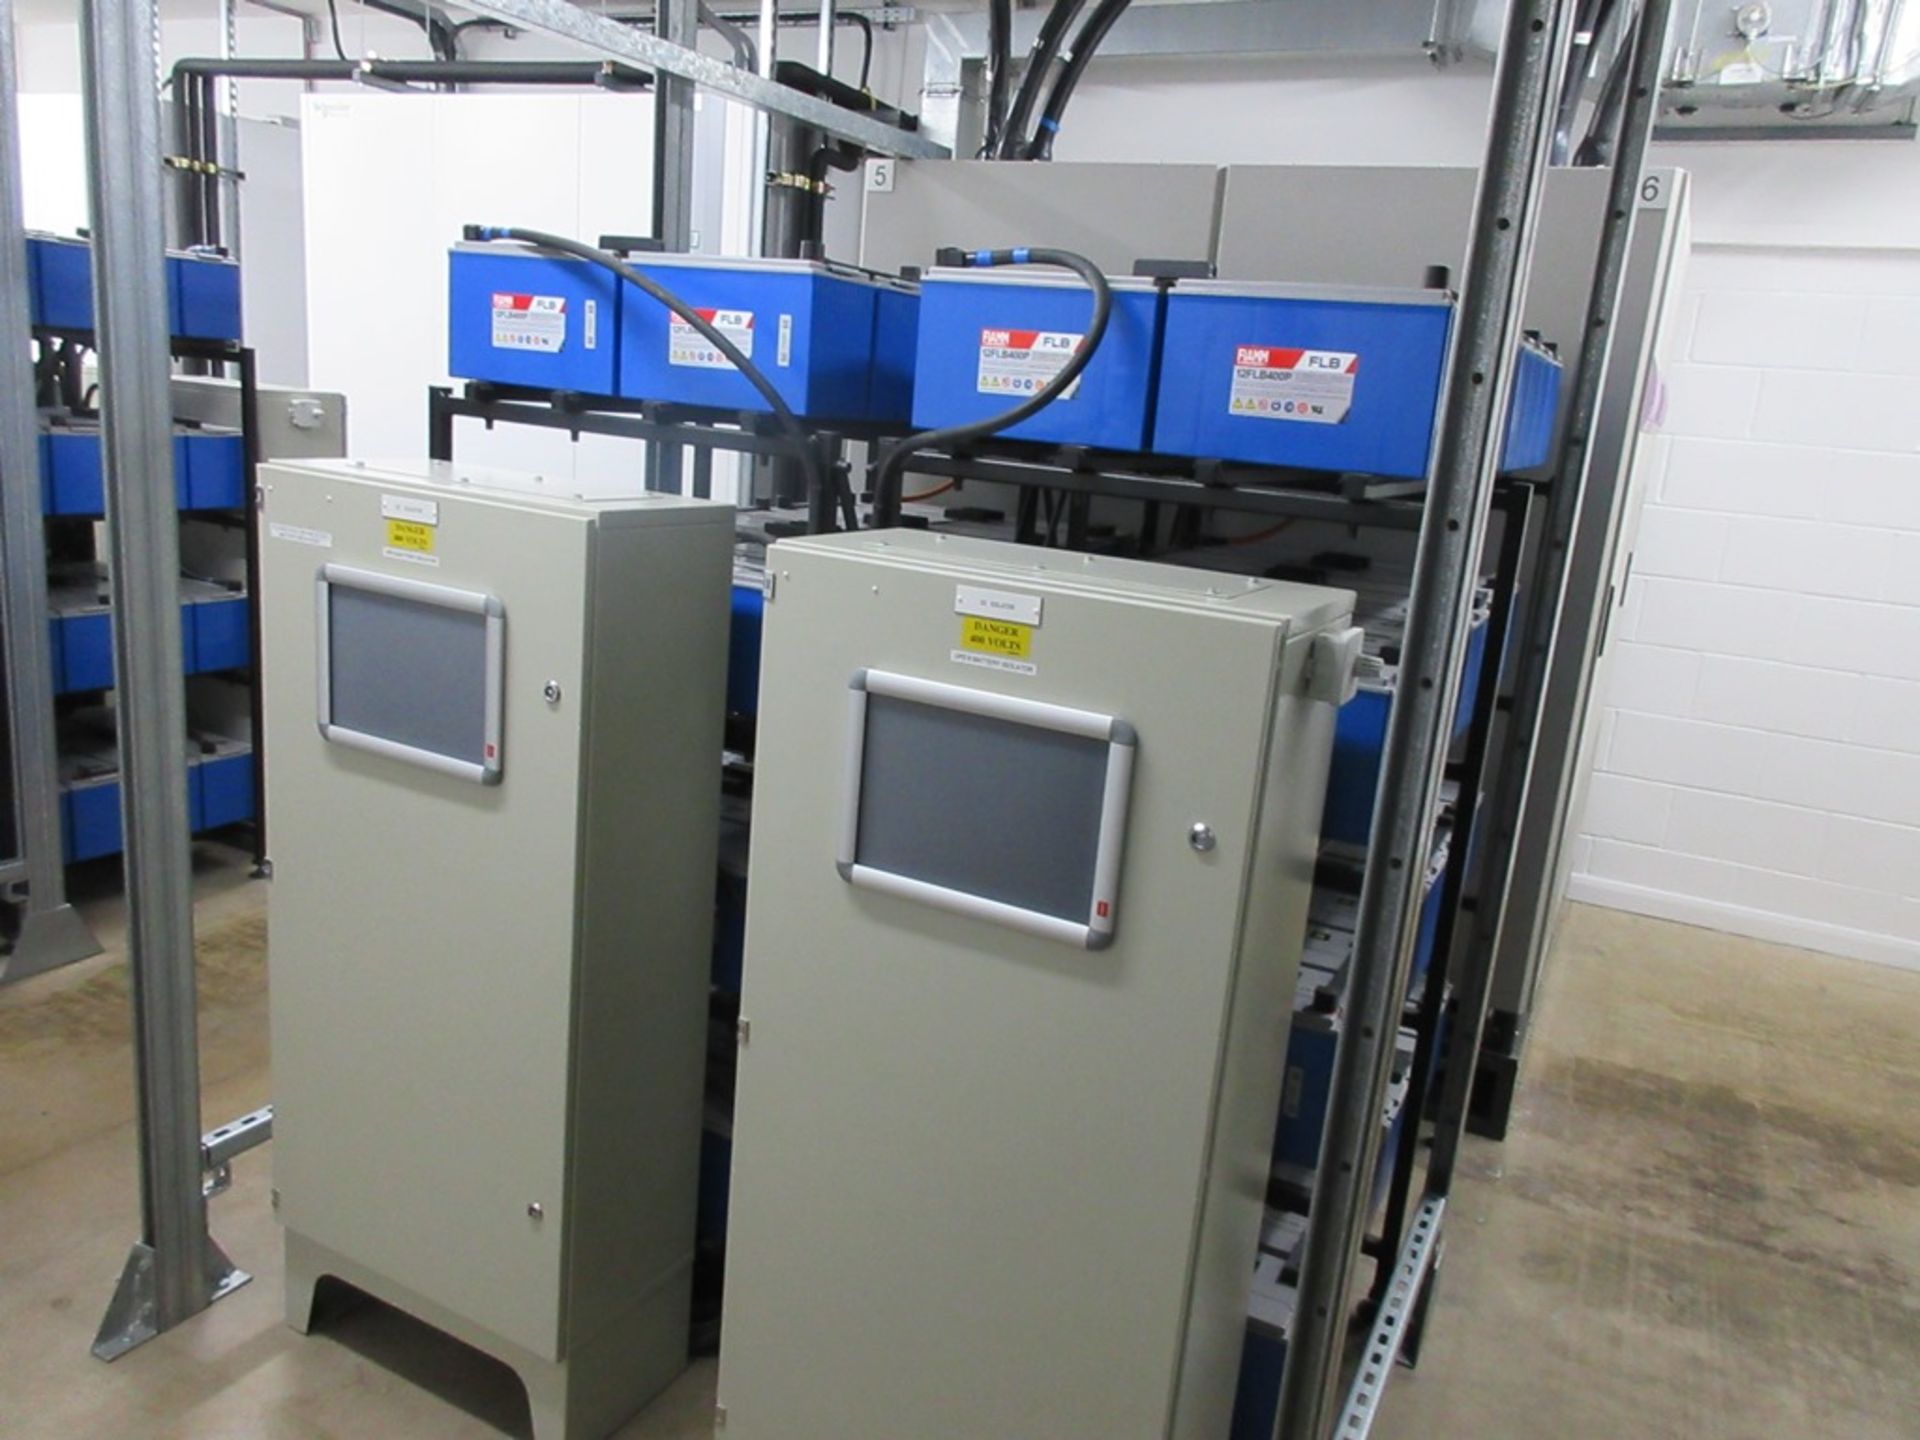 Six AEG Protect 4 uninterruptible power supply installations including battery racks and two PB135 - Image 2 of 14